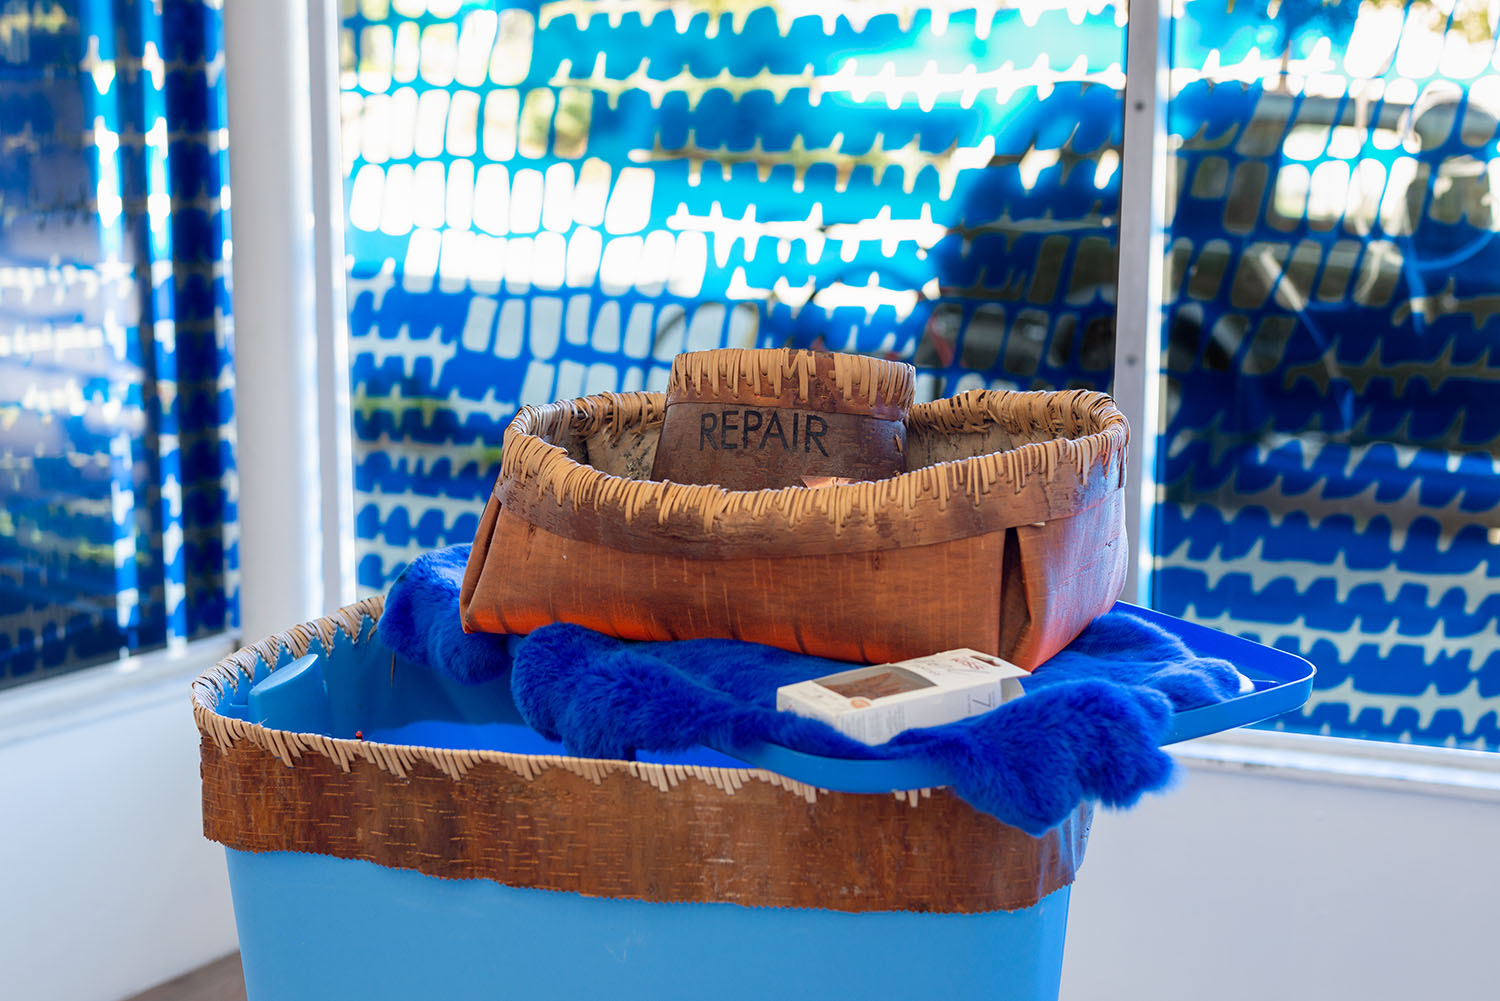 Two woven baskets, one small and one medium sized, sit on a big blue bin stitched along its rim with the same woven basket material. The small woven basket has the word "REPAIR" in black letters printed on the front of it.